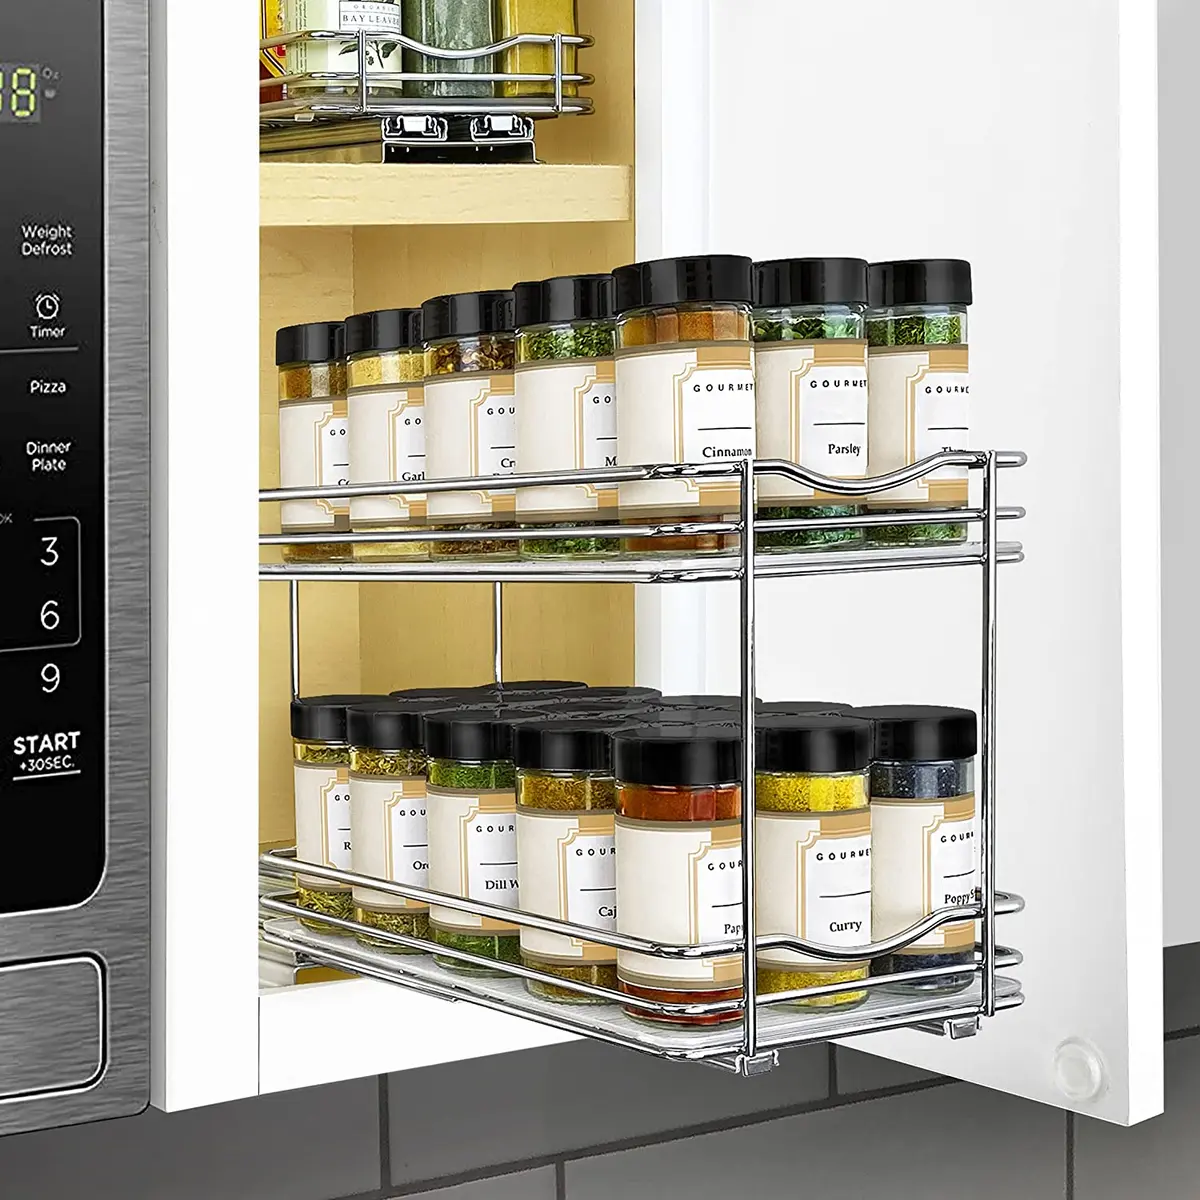 Pull Out Spice Rack Organizer for Cabinet - Slide Out Vertical Spice Rack